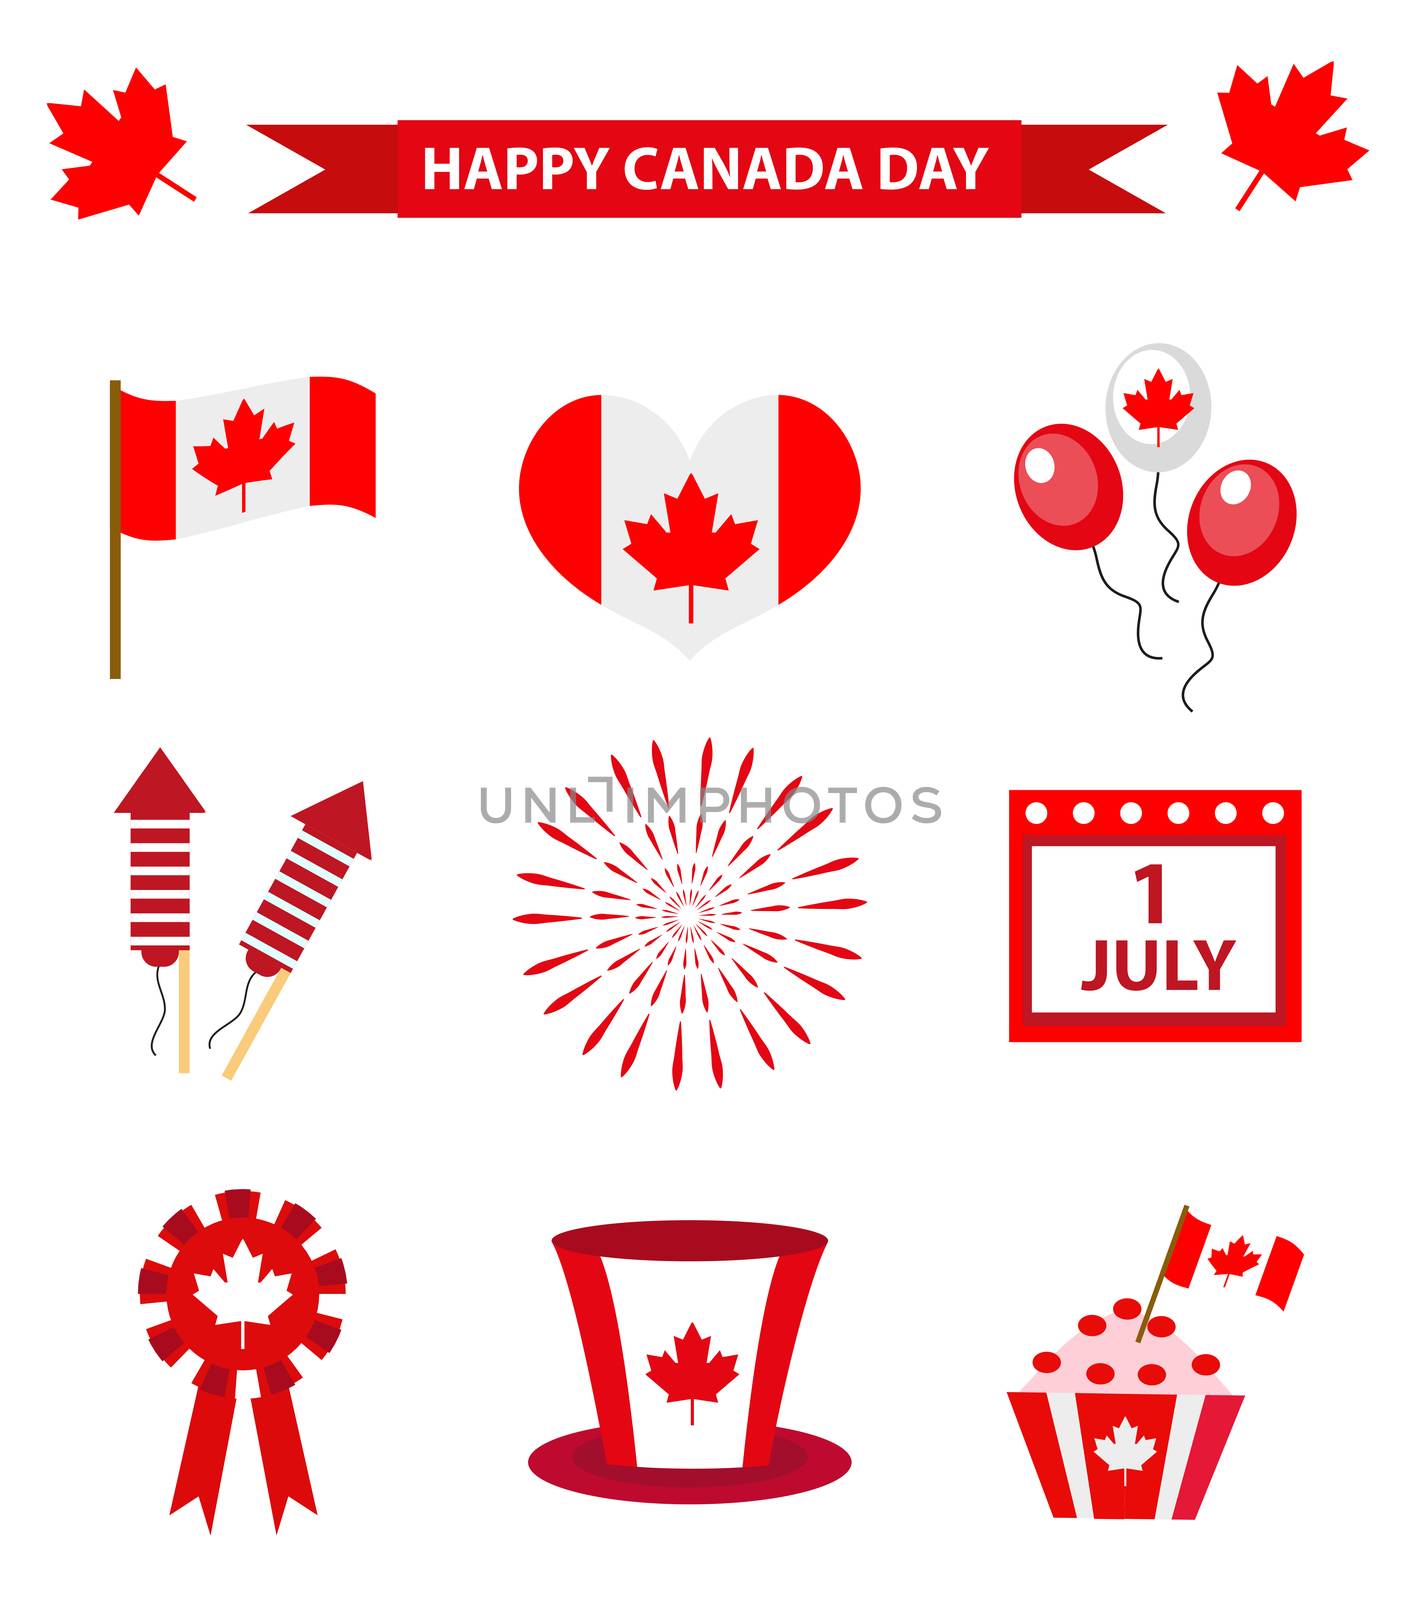 Happy Canada Day icons set, design elements, flat style. July 1 National Day of Canada holiday collection of objects with firework, flag, hat, balloons, emblem. illustration. by lucia_fox